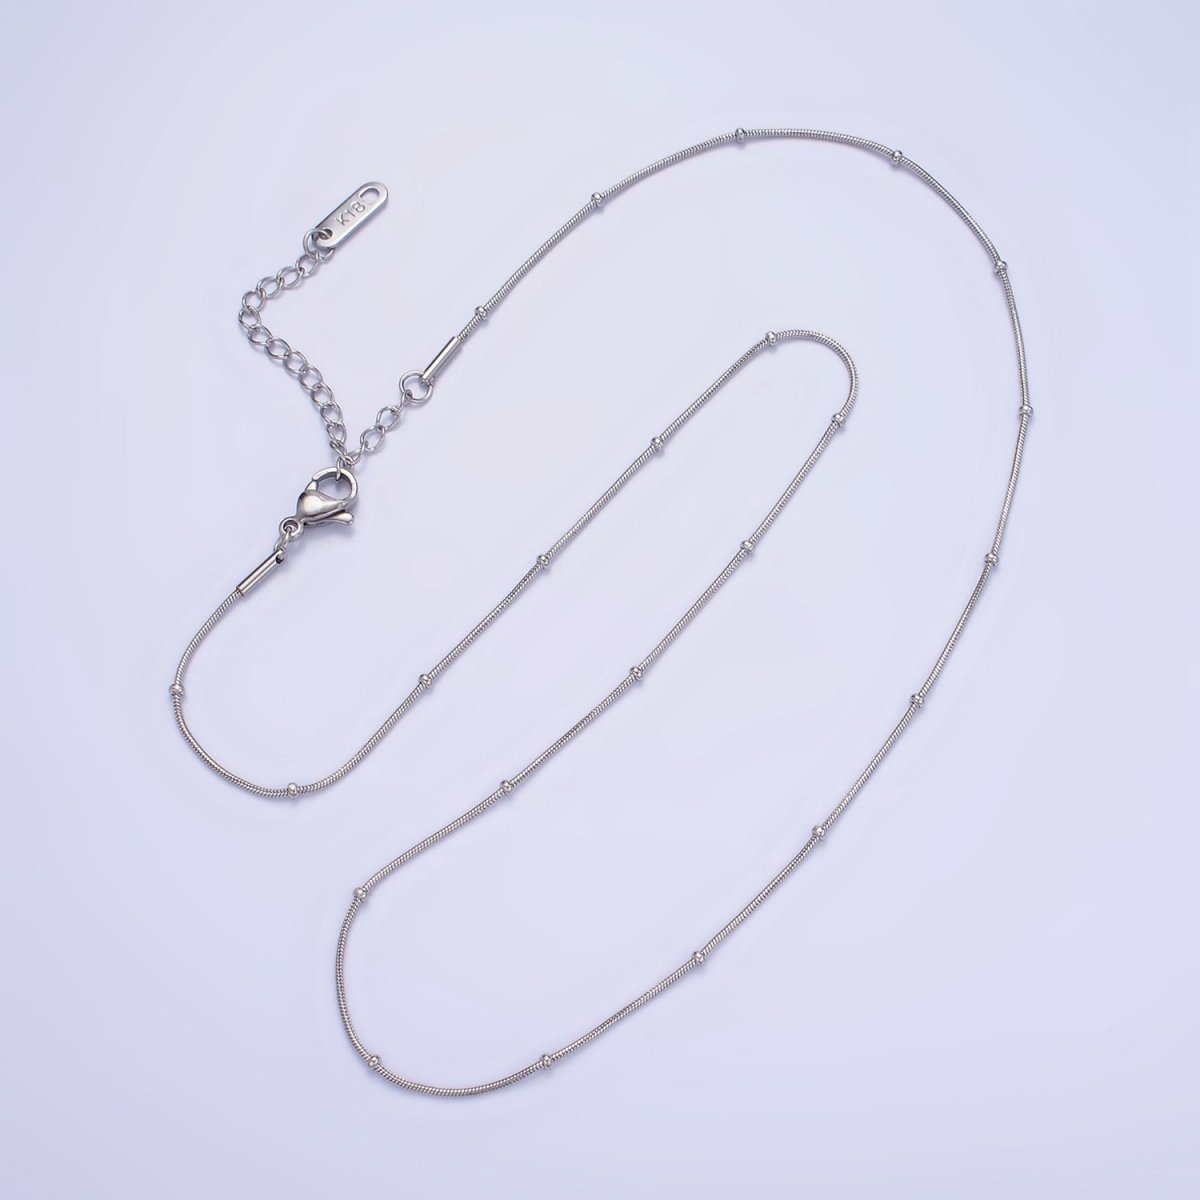 Stainless Steel 1.8mm Satellite Snake Chain 18 Inch Necklace w. Extender in Gold & Silver | WA-3484 WA-2485 - DLUXCA